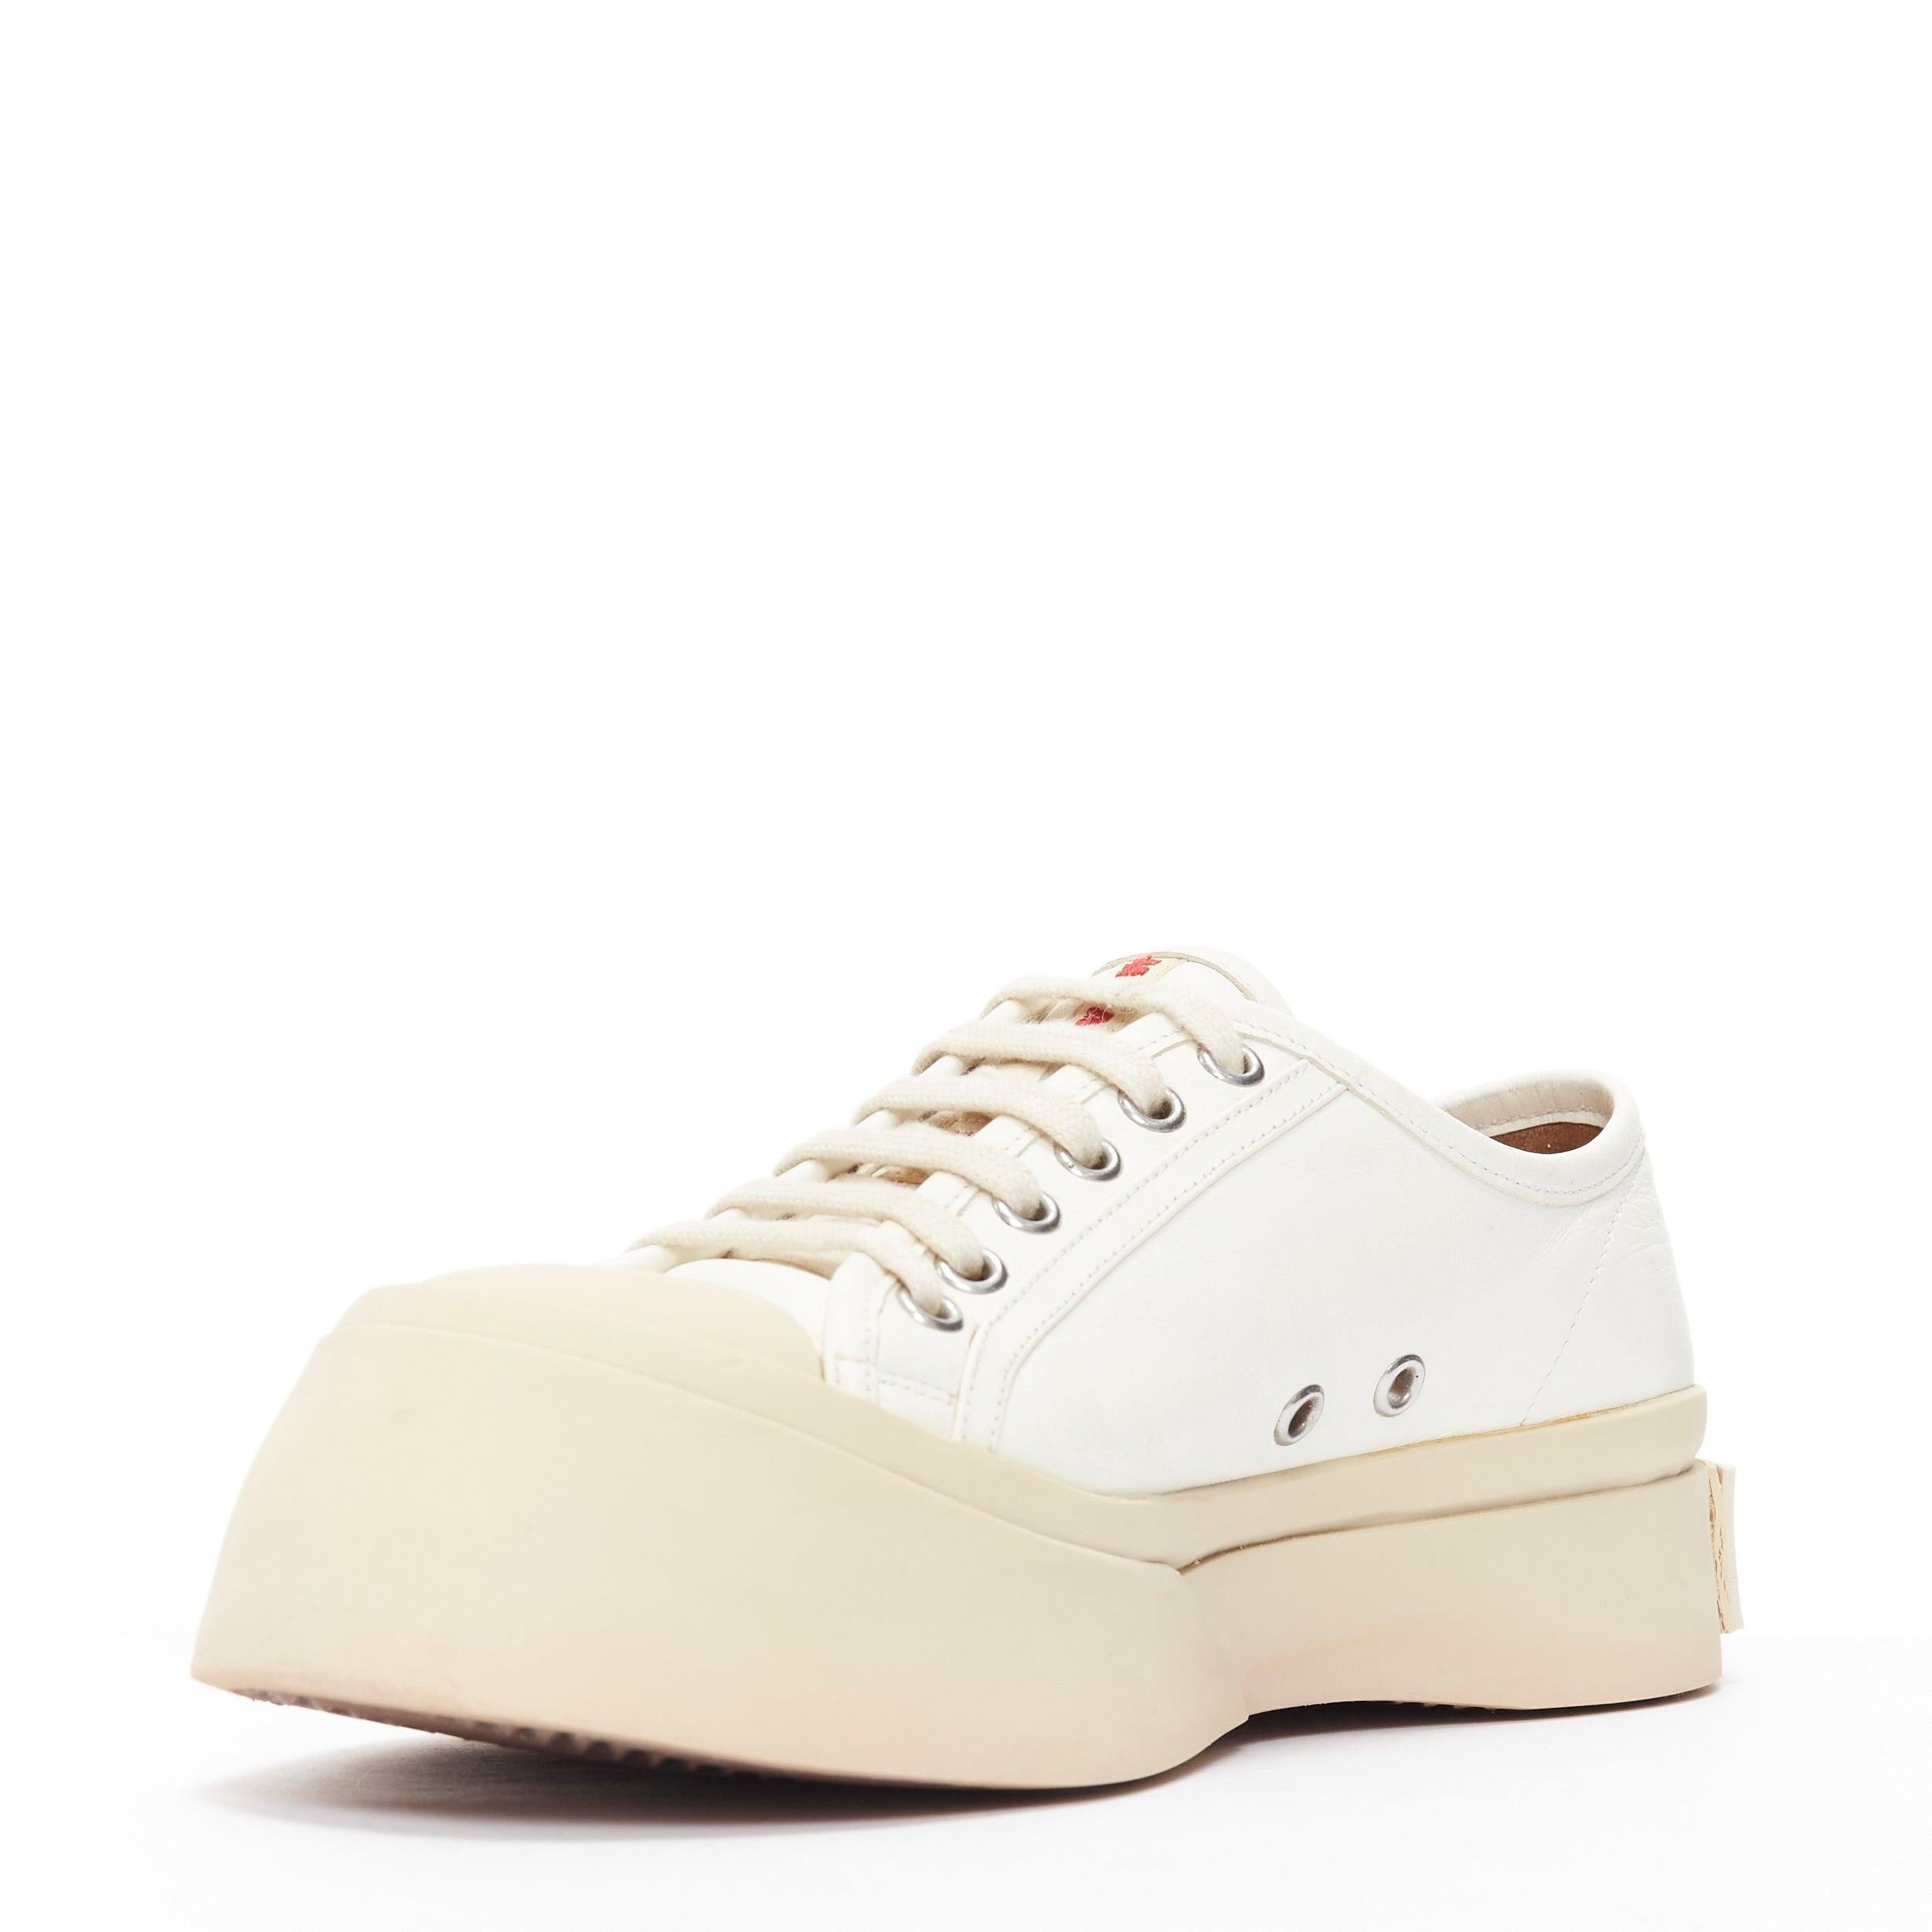 Women's MARNI Pablo white leather chunky wide toe lace up low top sneakers EU36 For Sale